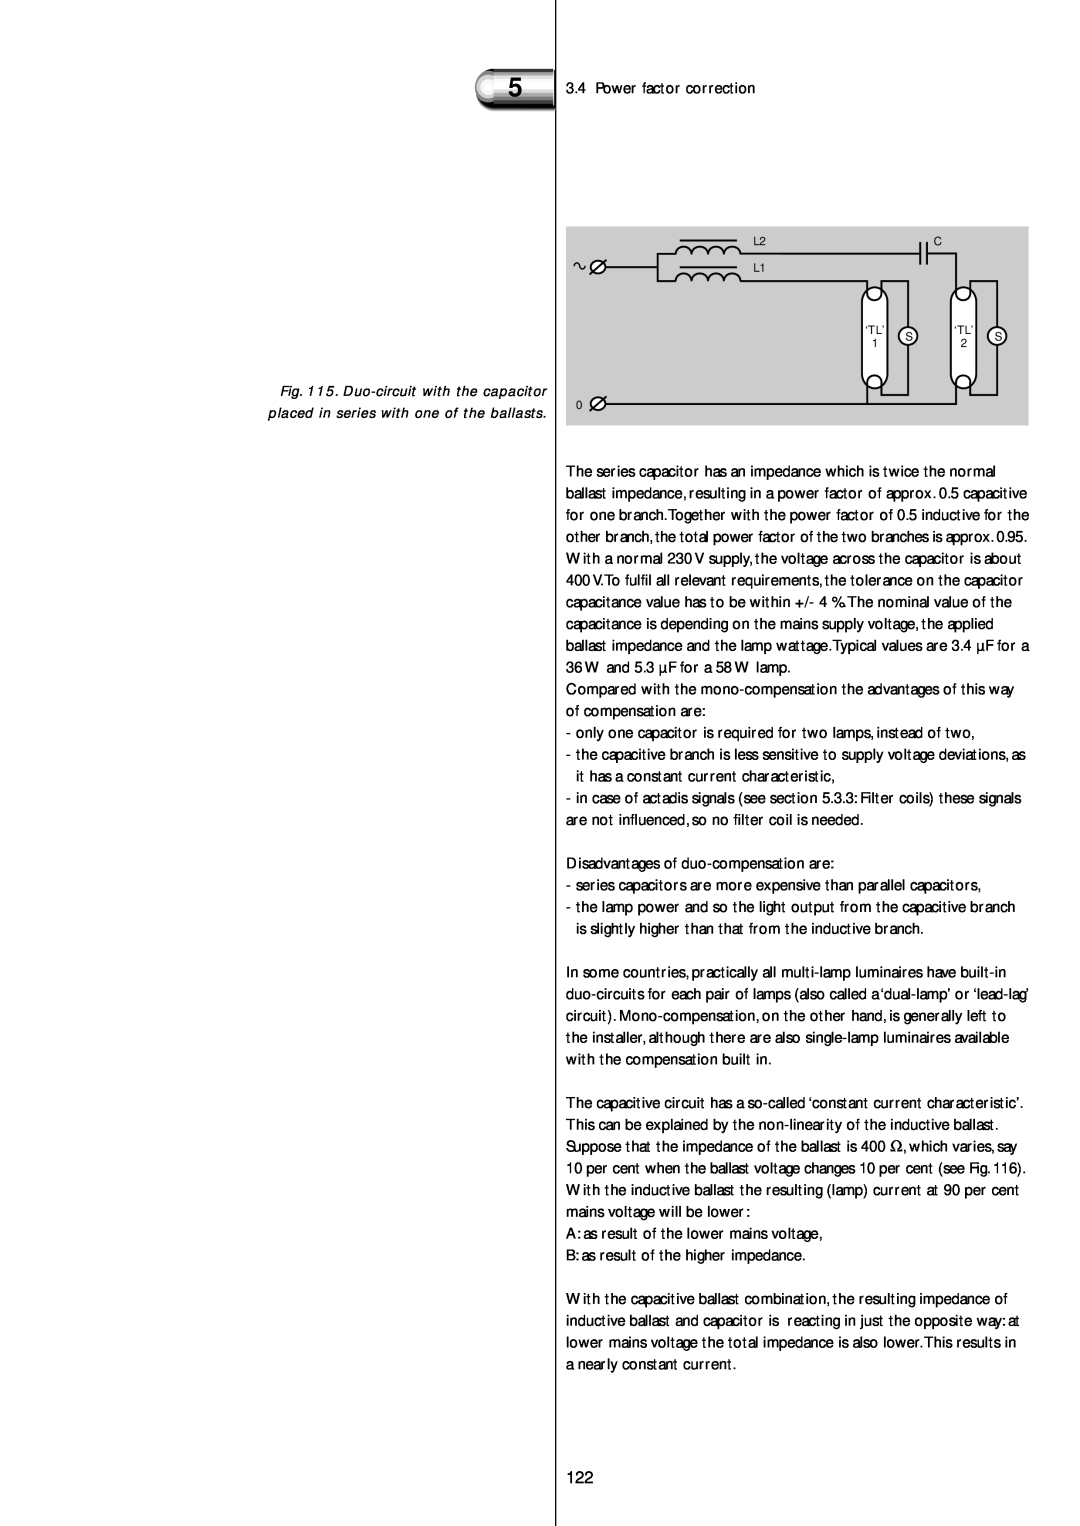 Philips Electromagnetic Lamp manual Duo-circuitwith the capacitor, placed in series with one of the ballasts 